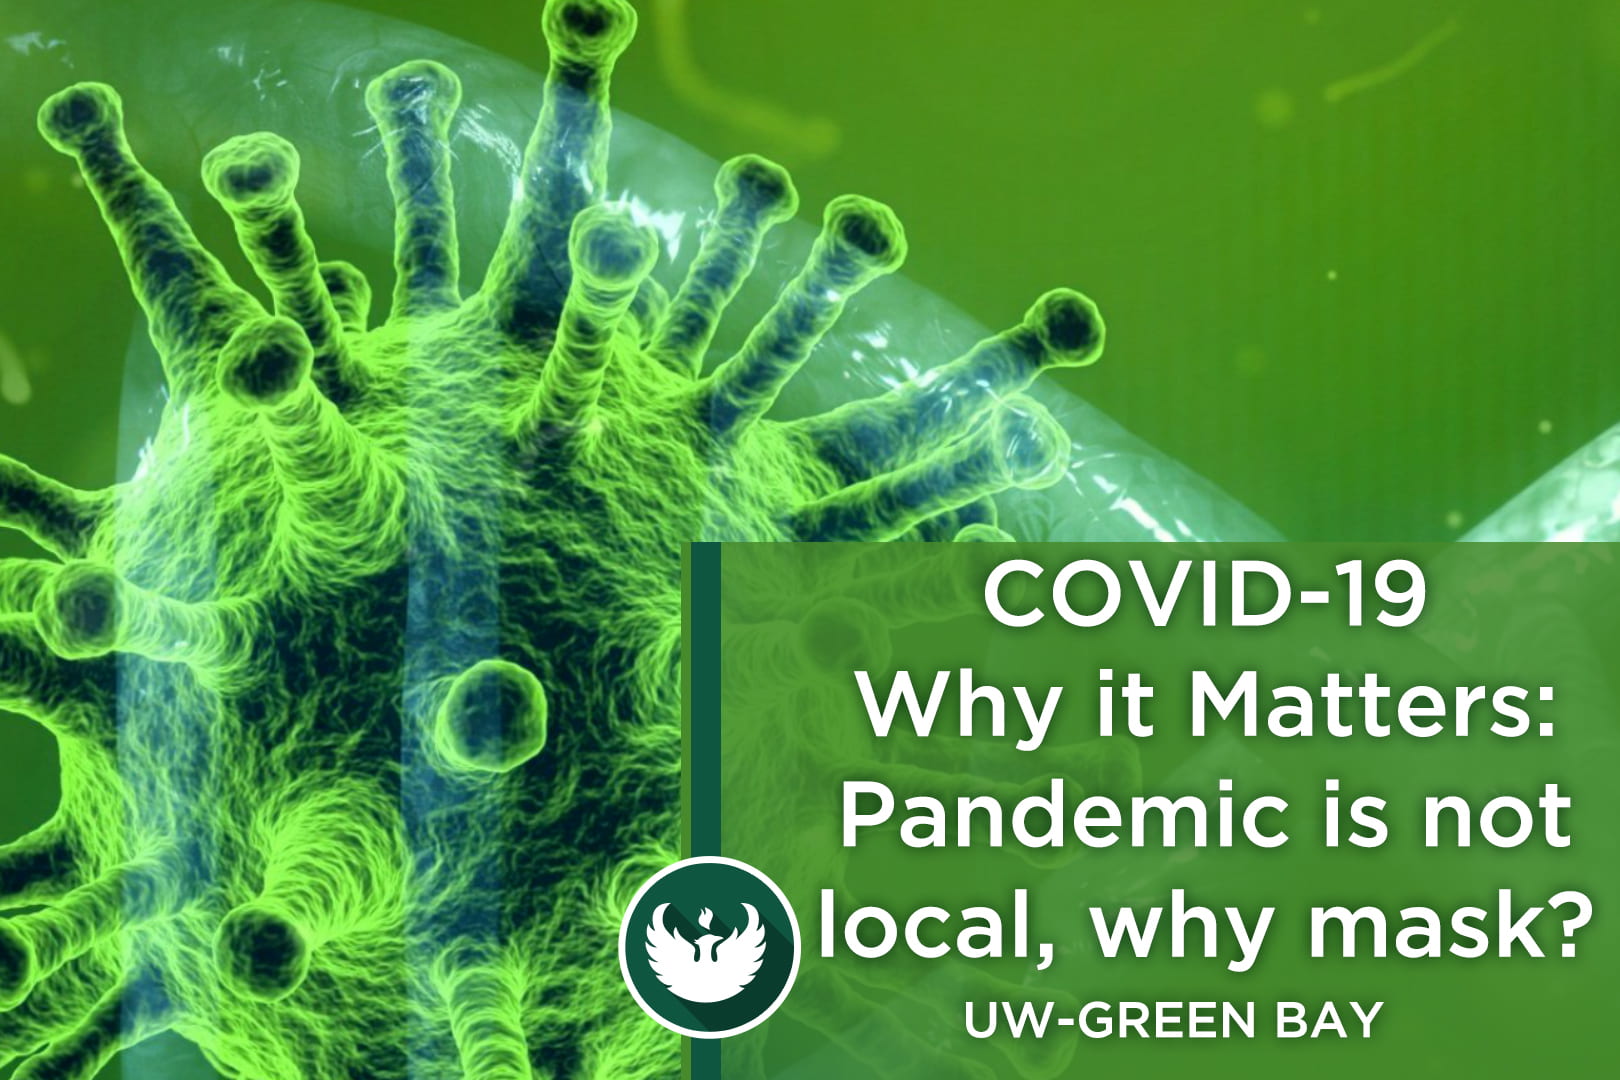 Photo of the covid-19 virus enlarged under a microscope with text "Covid-19 Way it Matters, Part 7: Pandemic is not local, why wear a mask?